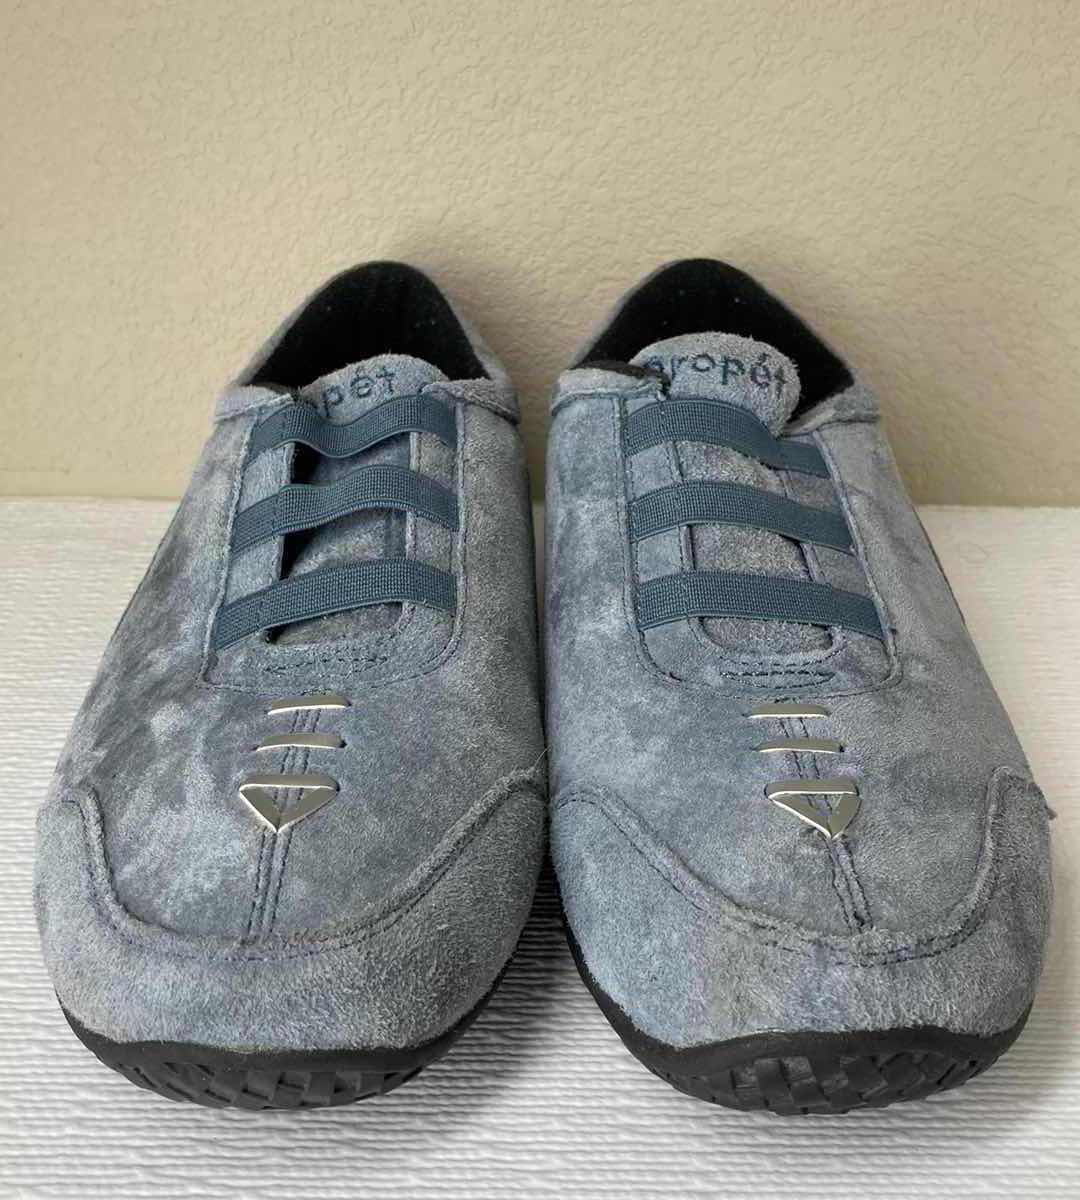 Photo 3 of PROPET GRAY SUEDE SHOES SIZE 8.5 & PROPET BLACK SUEDE SHOES SIZE 8.5